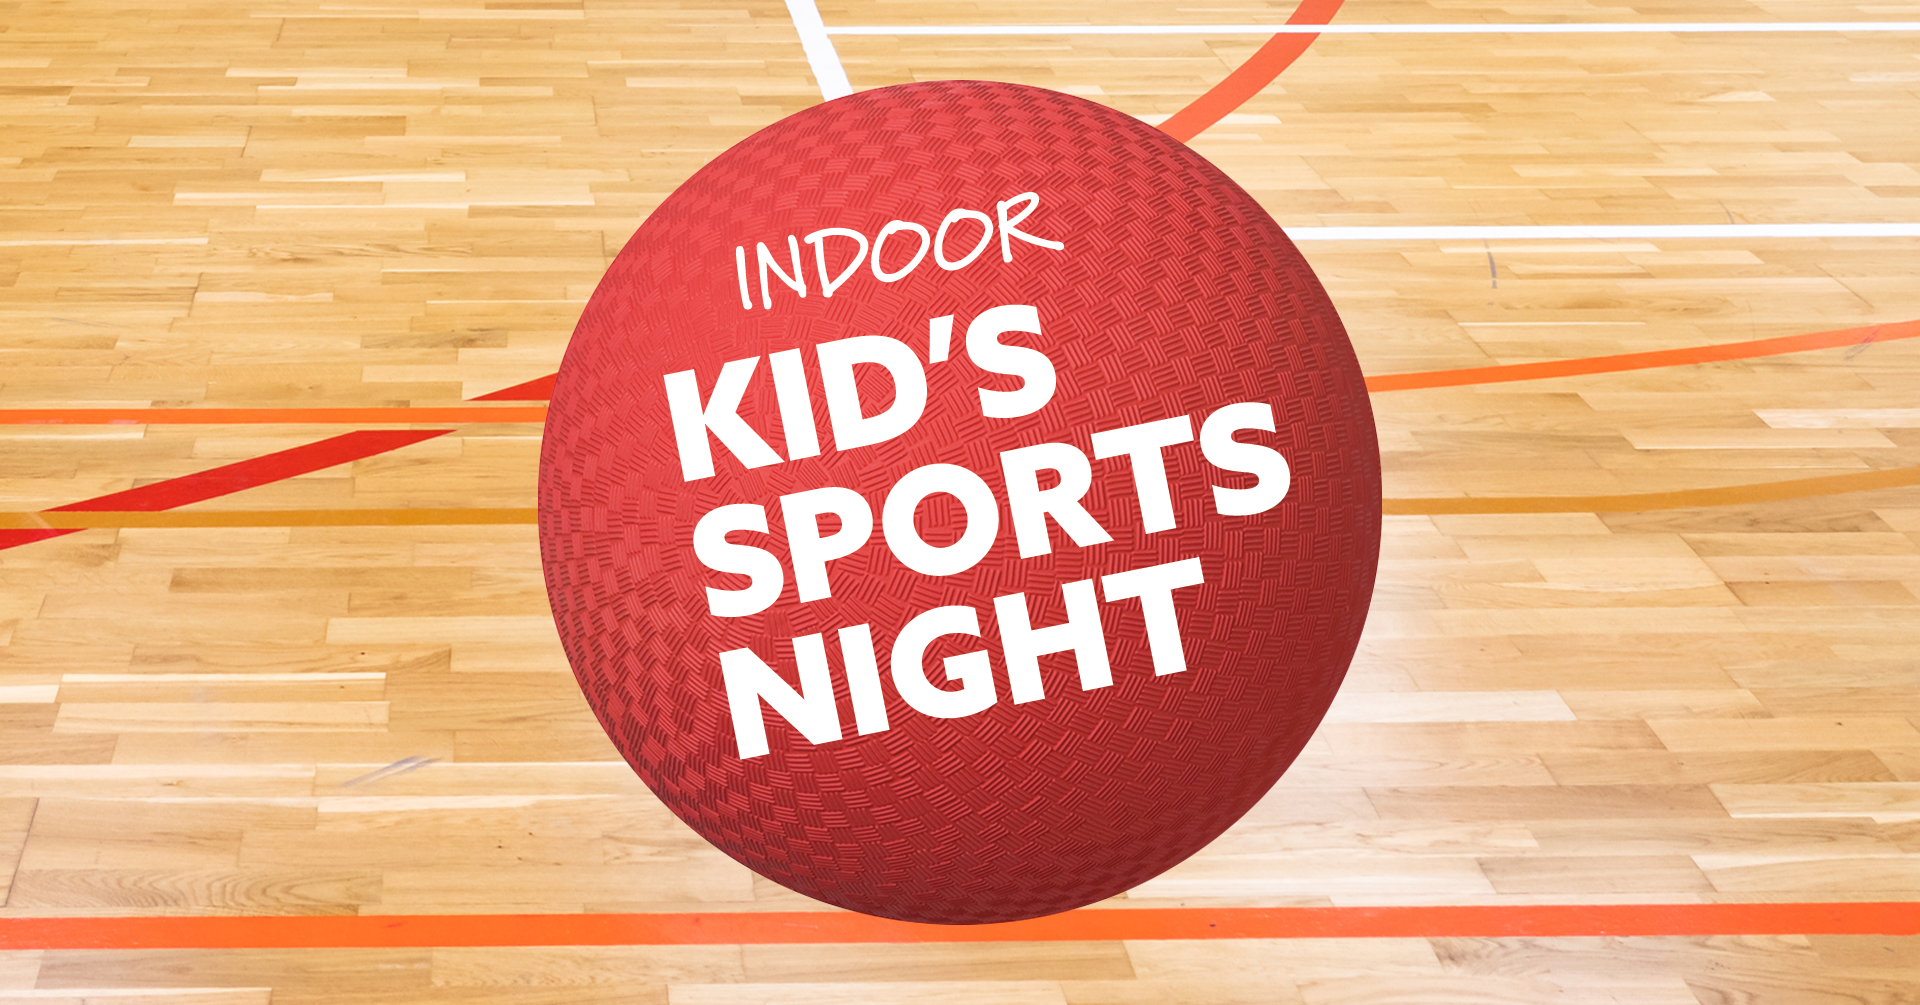 The logo is a red ball that says "Indoor Kid's Sports Night" on a gym wood floor.